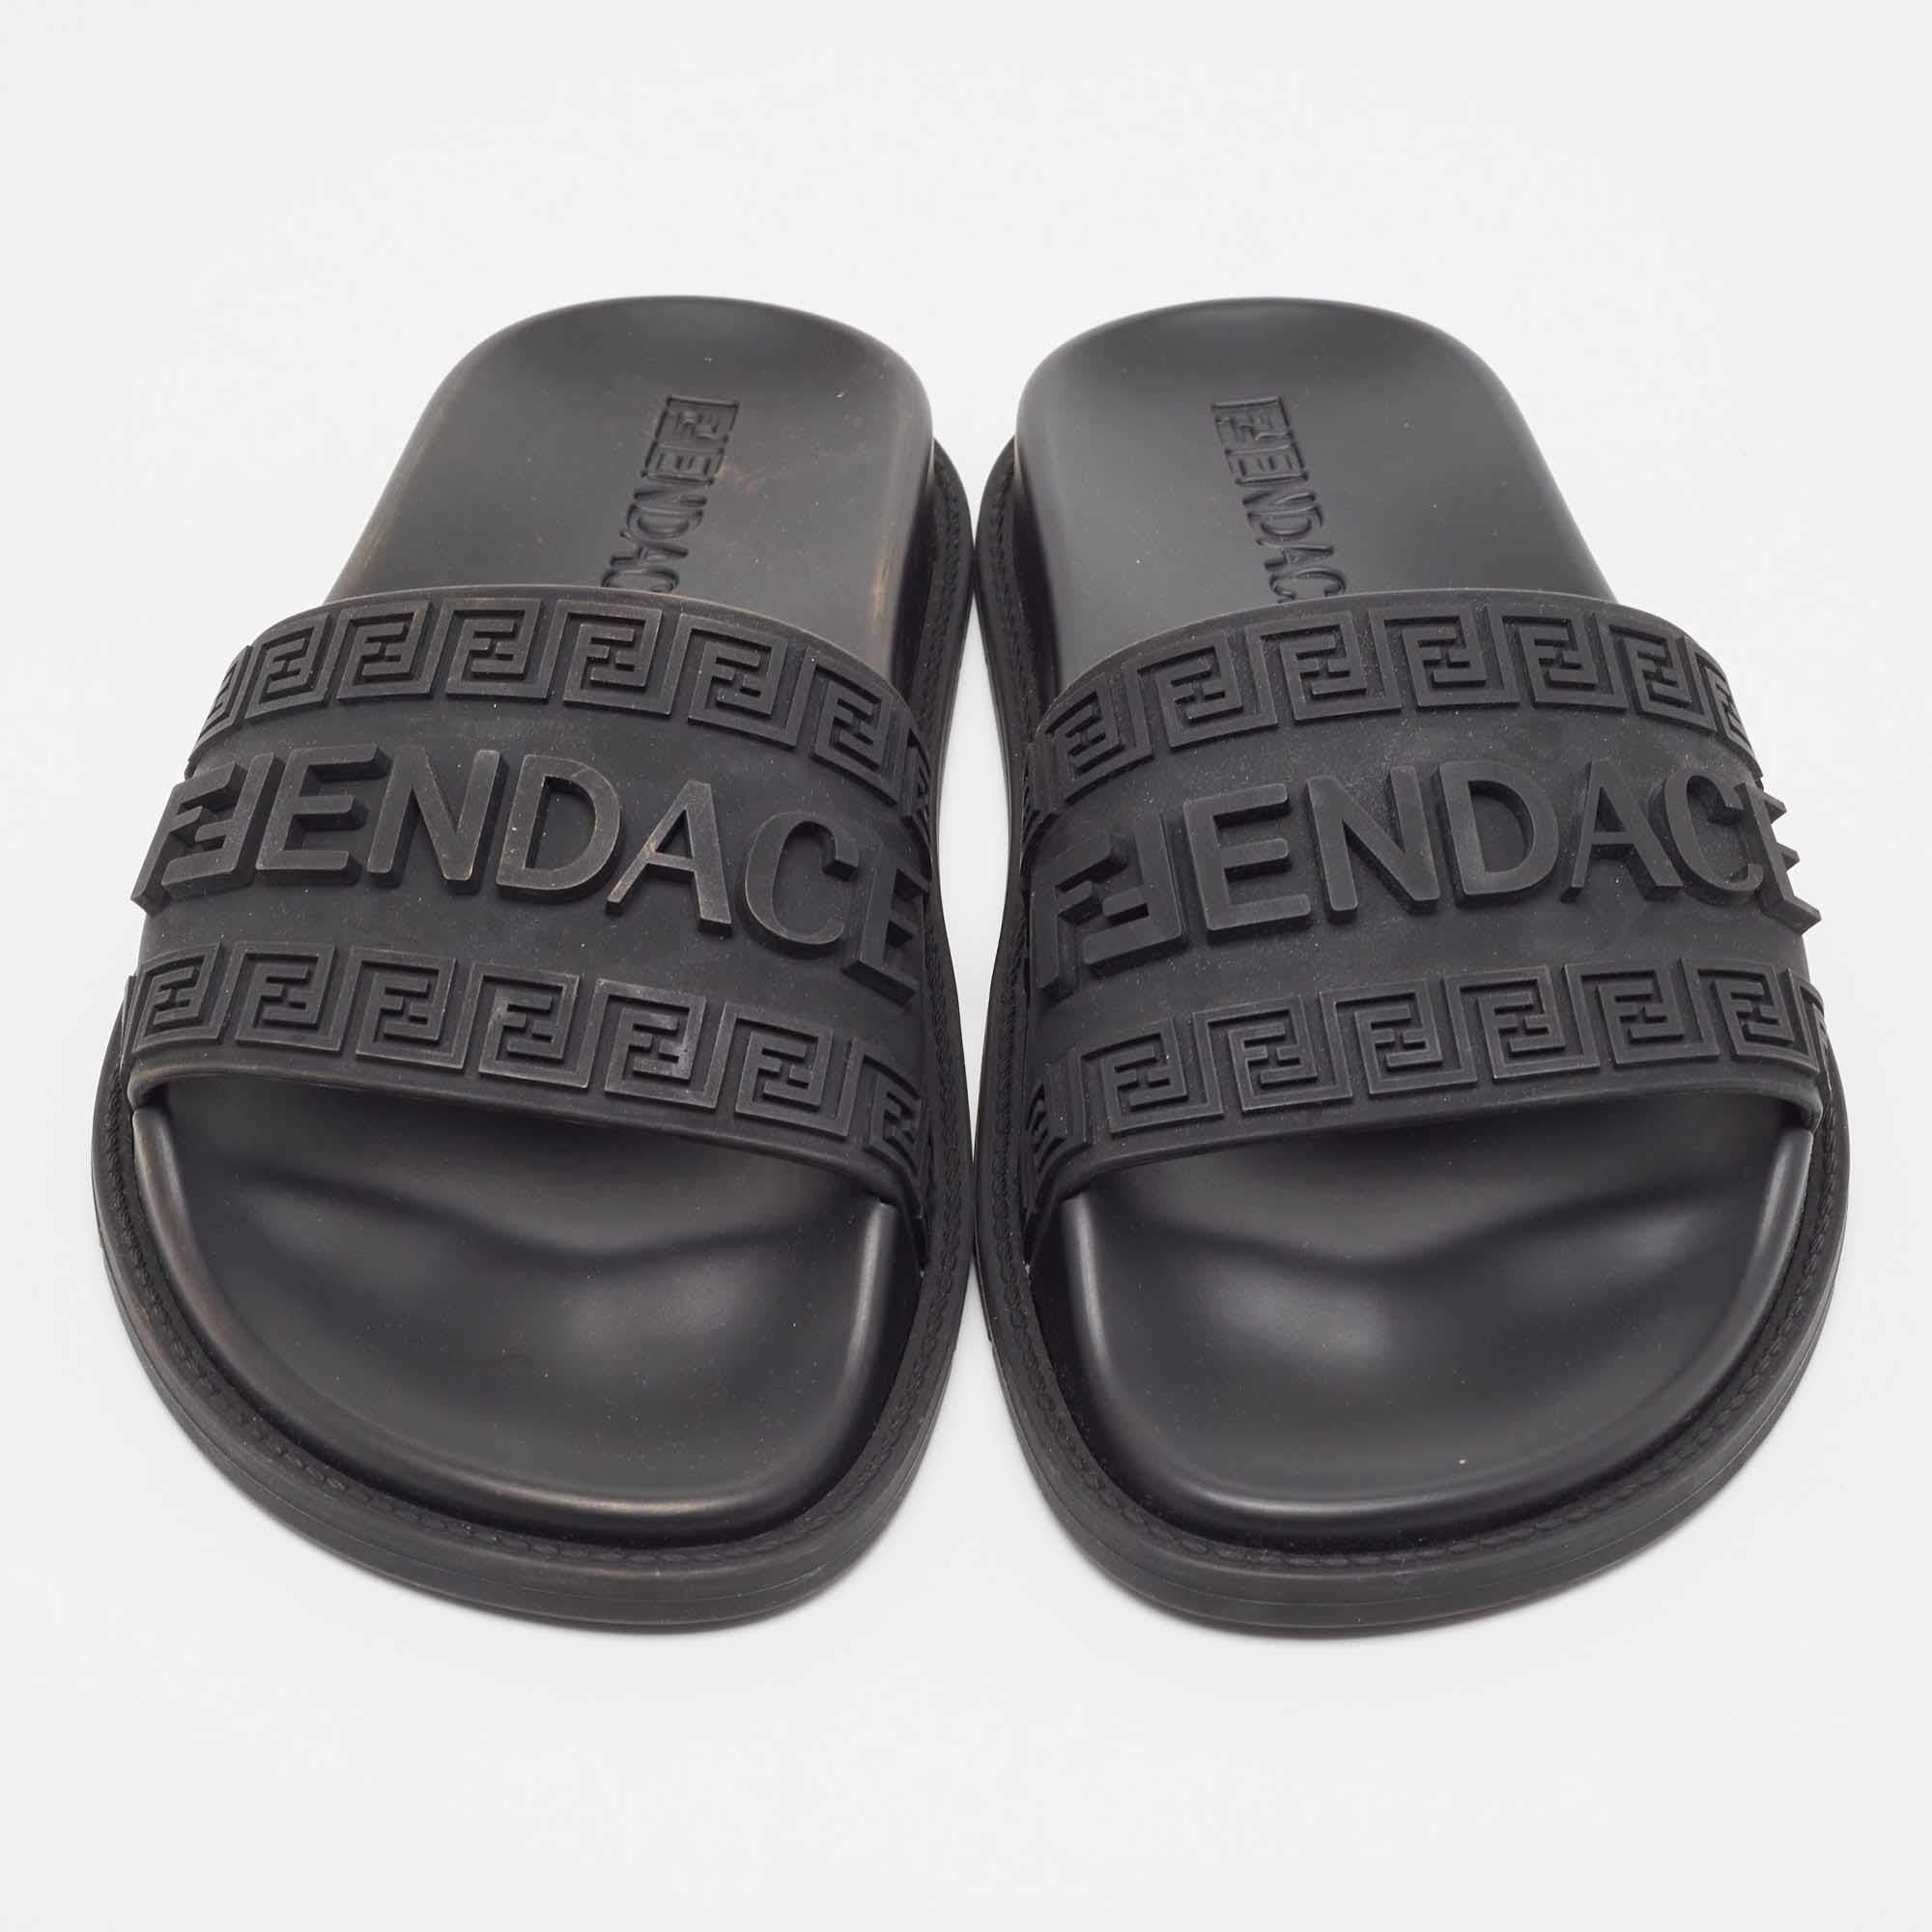 These Fendi x Versac rubber slides for men have the branding of both brands on the uppers. They're perfect for the beach, vacation days, or everyday use.

Includes: Original Dustbag, Original Box